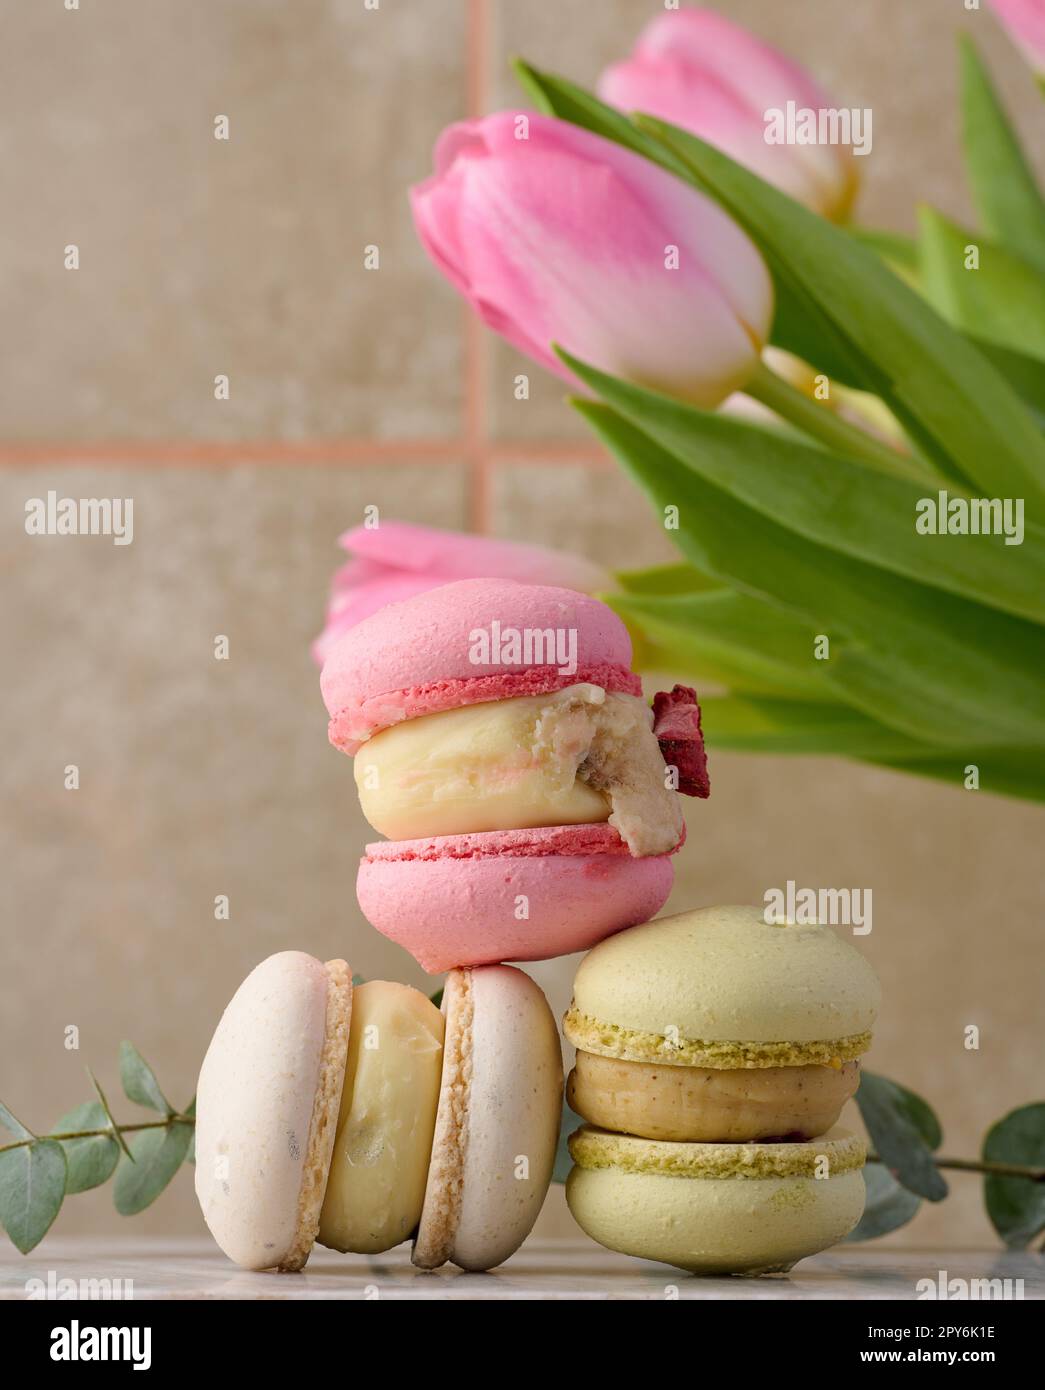 Baked macarons with different flavors on the table, behind a bouquet of tulips Stock Photo